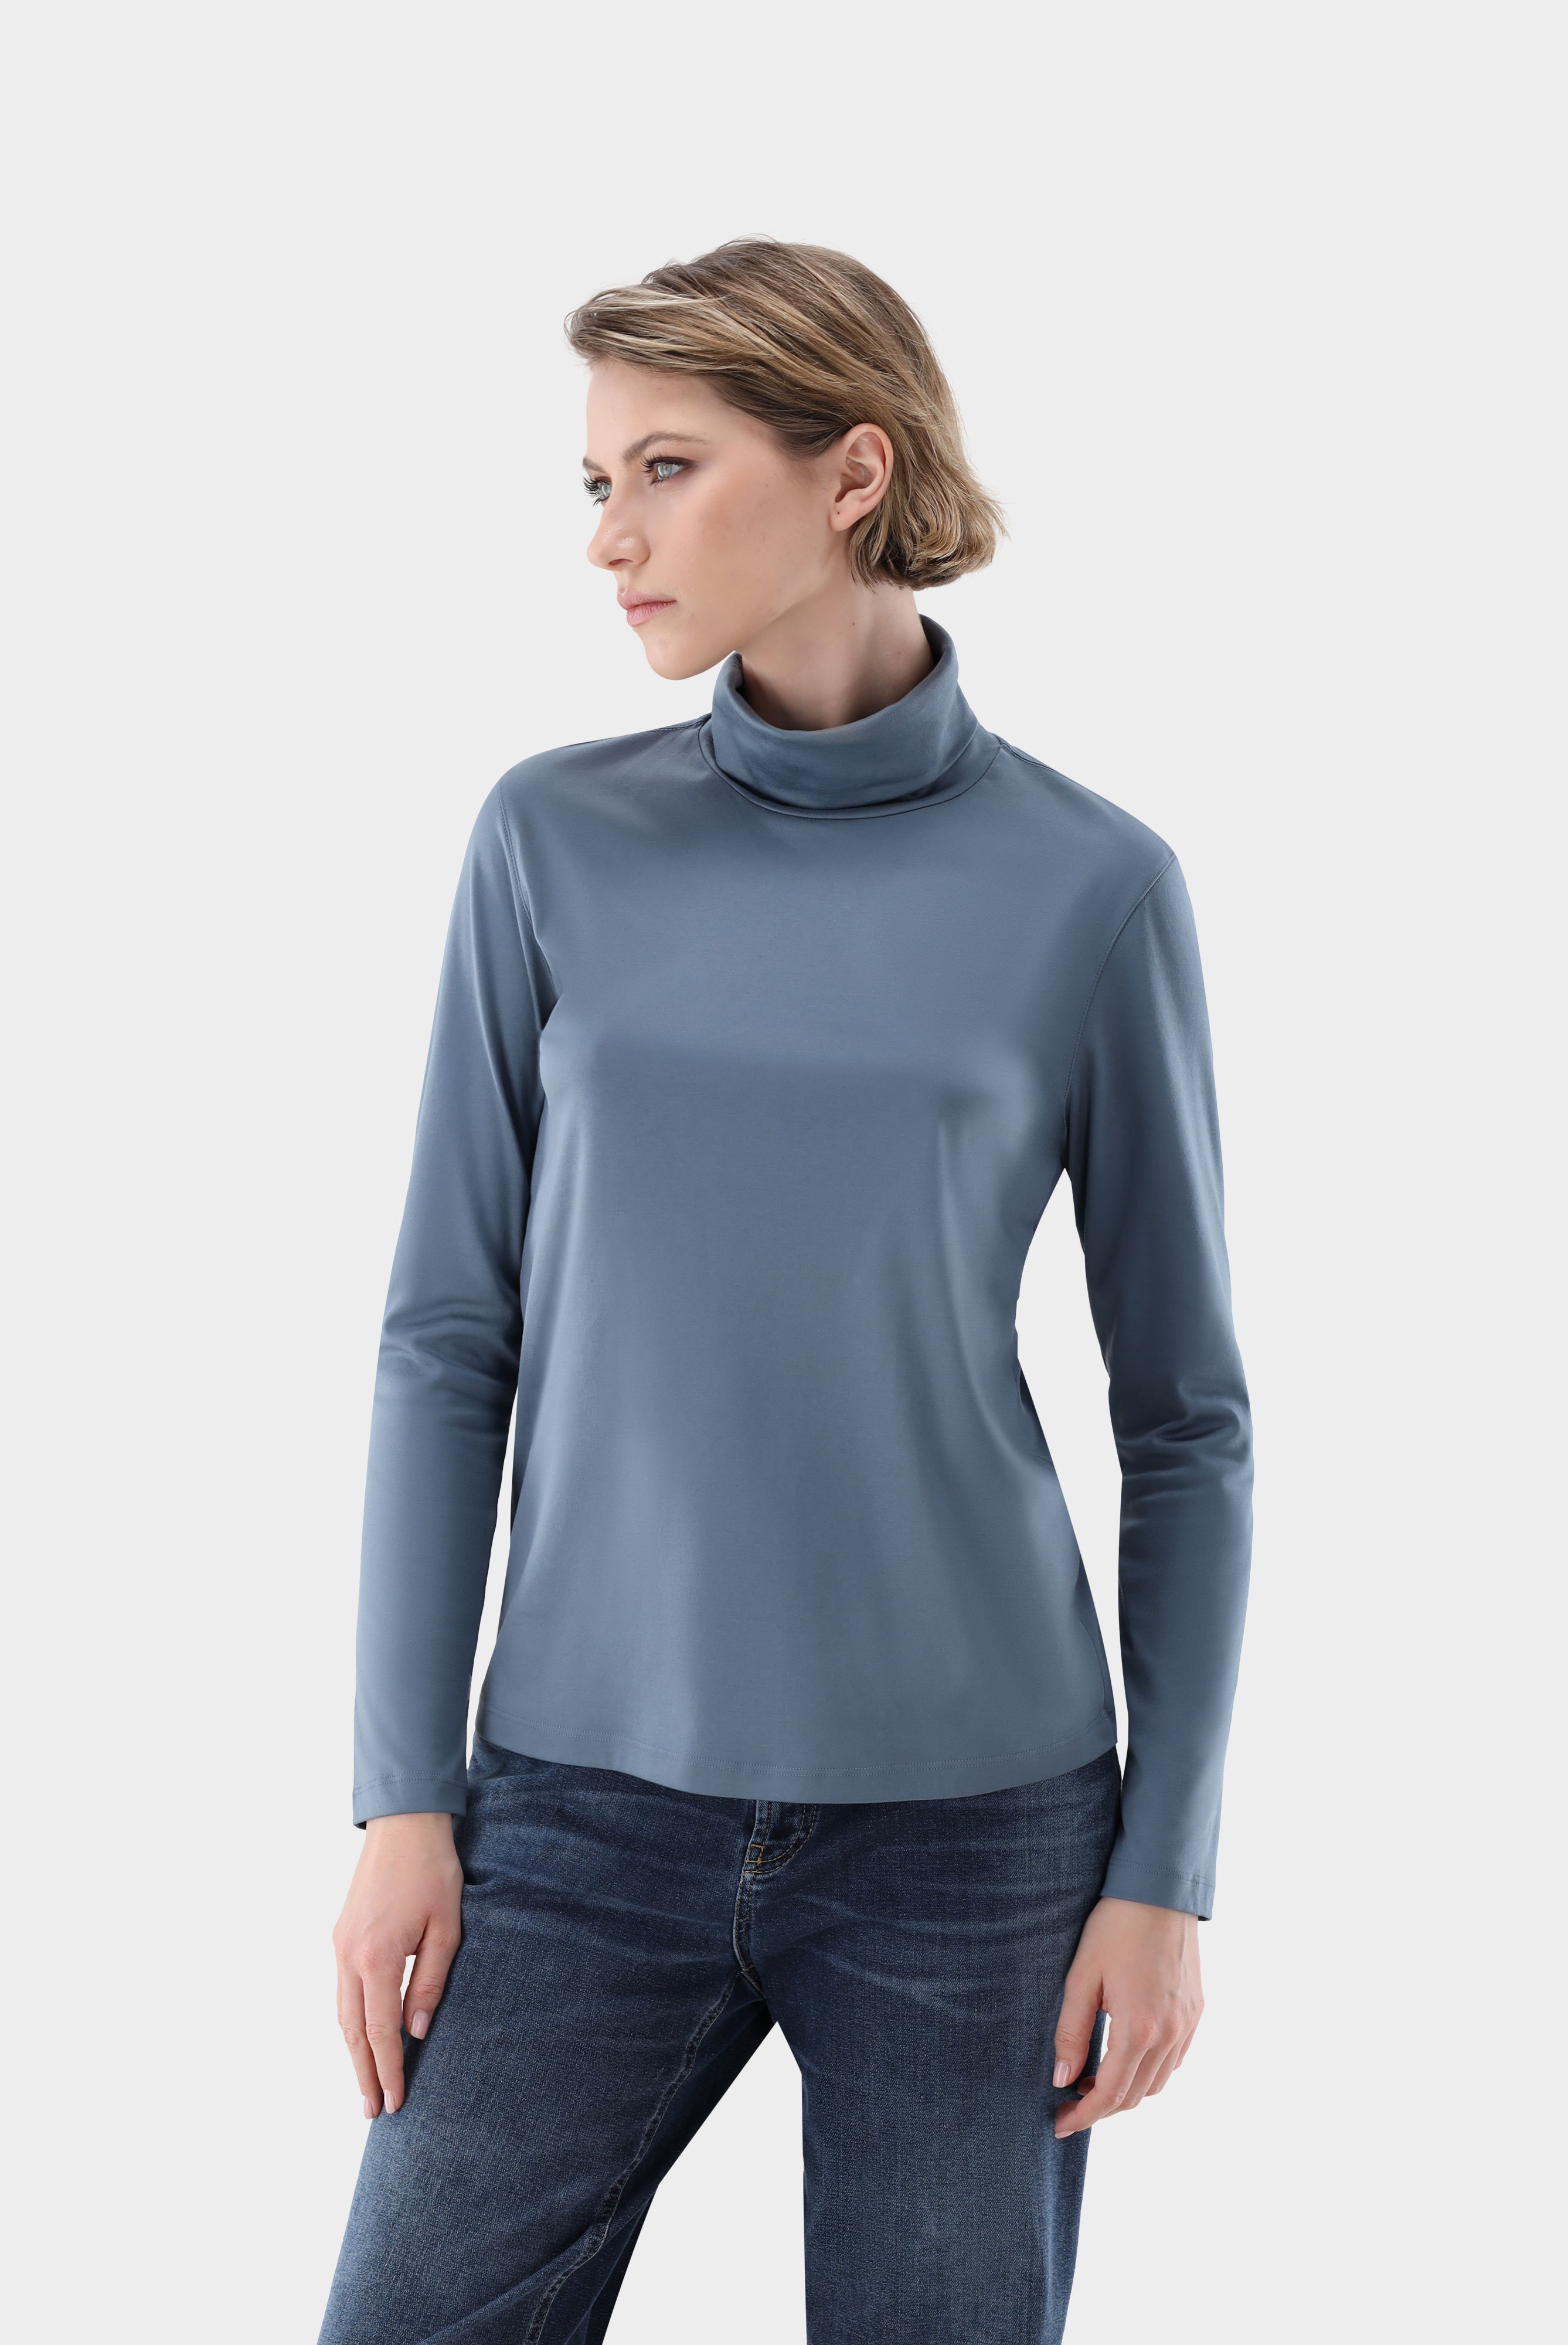 Fitted jersey Shirt with turtleneck